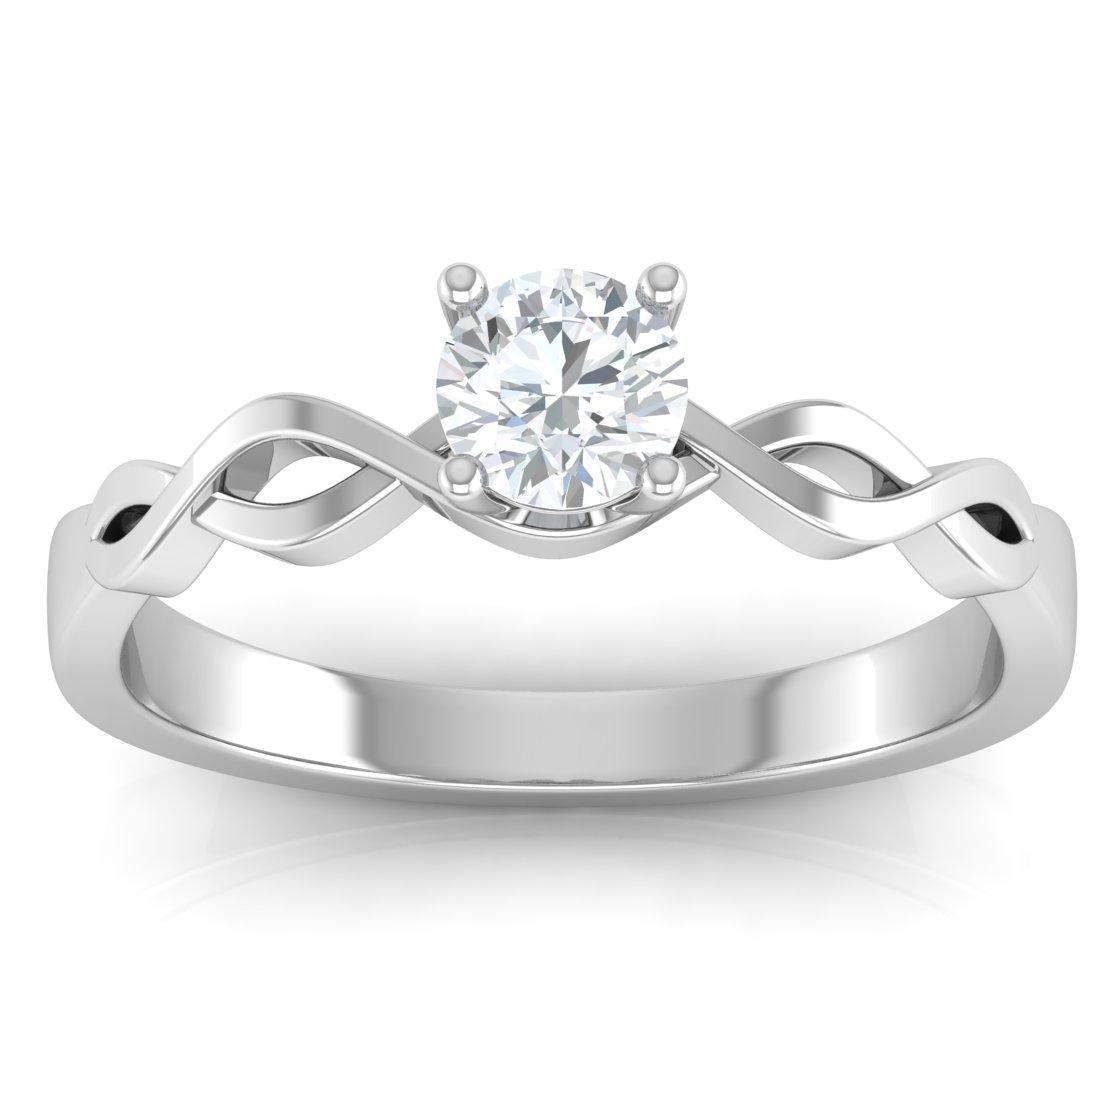 5 Must-Have Diamond Jewelry Pieces | Solitaire diamond ring